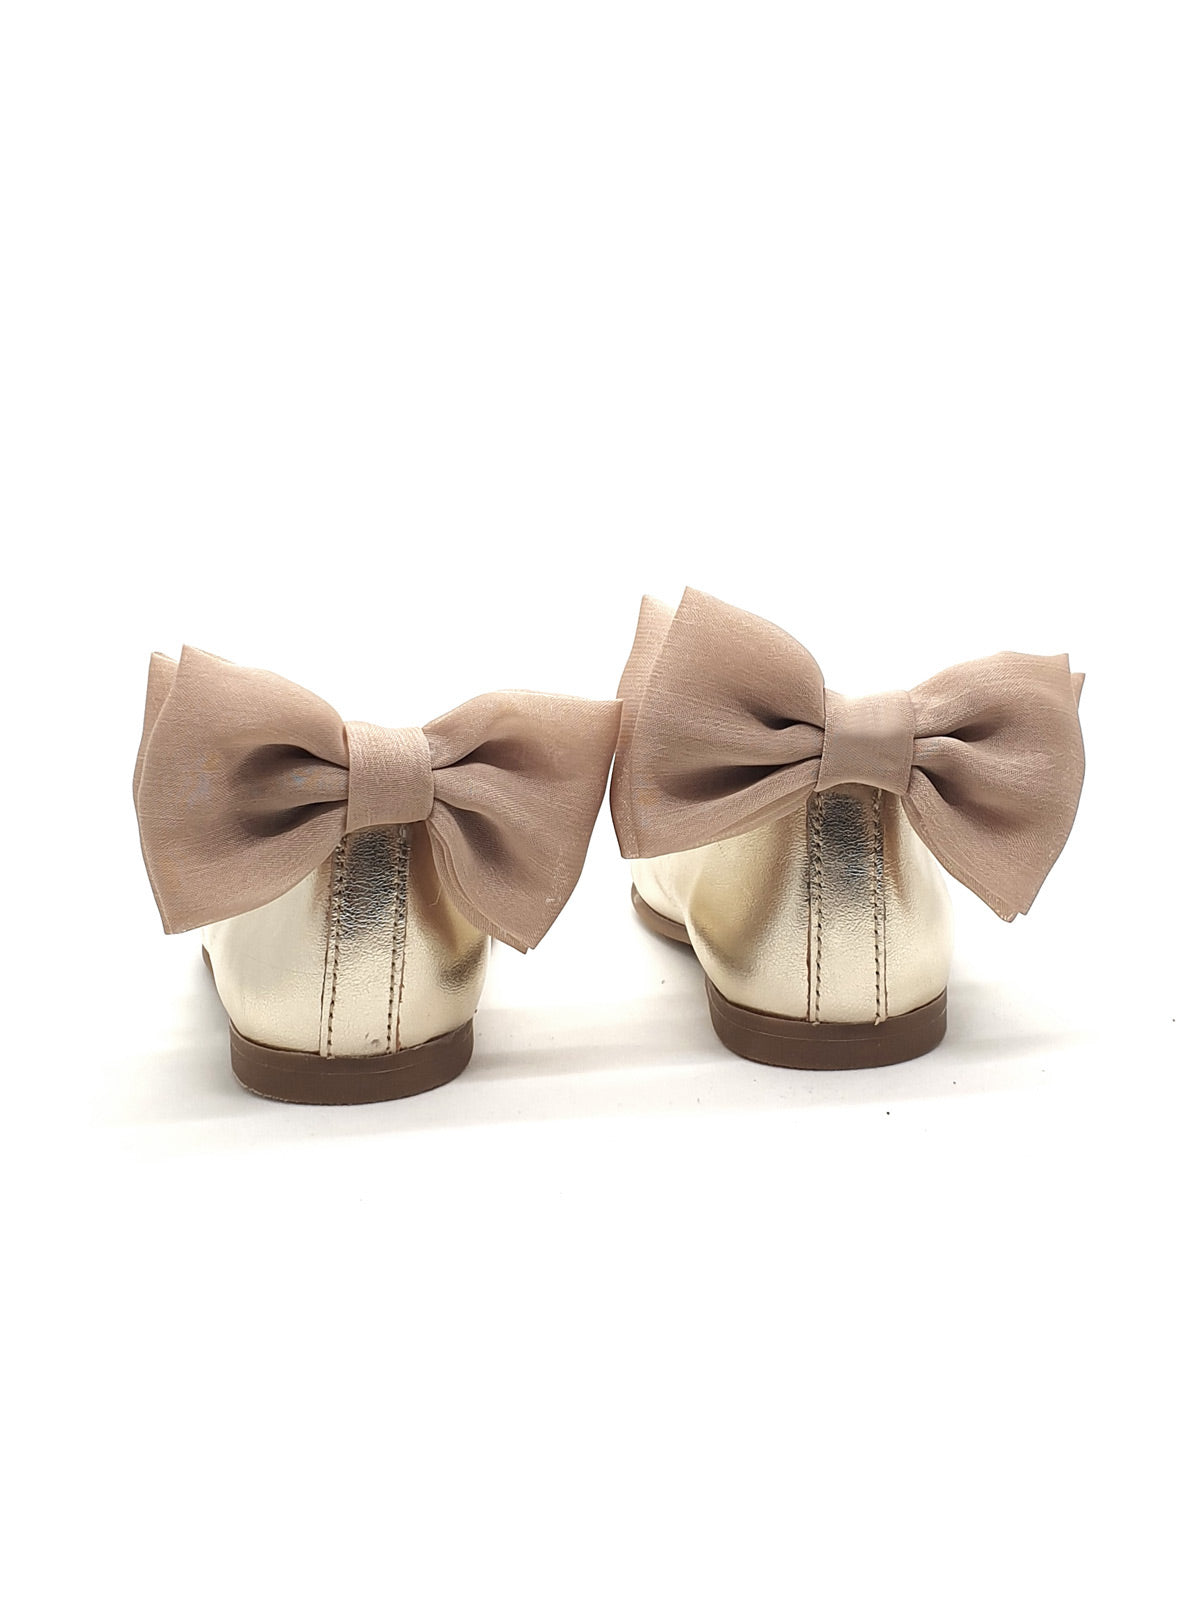 Girl's Ballerina Leather shoe with Bow